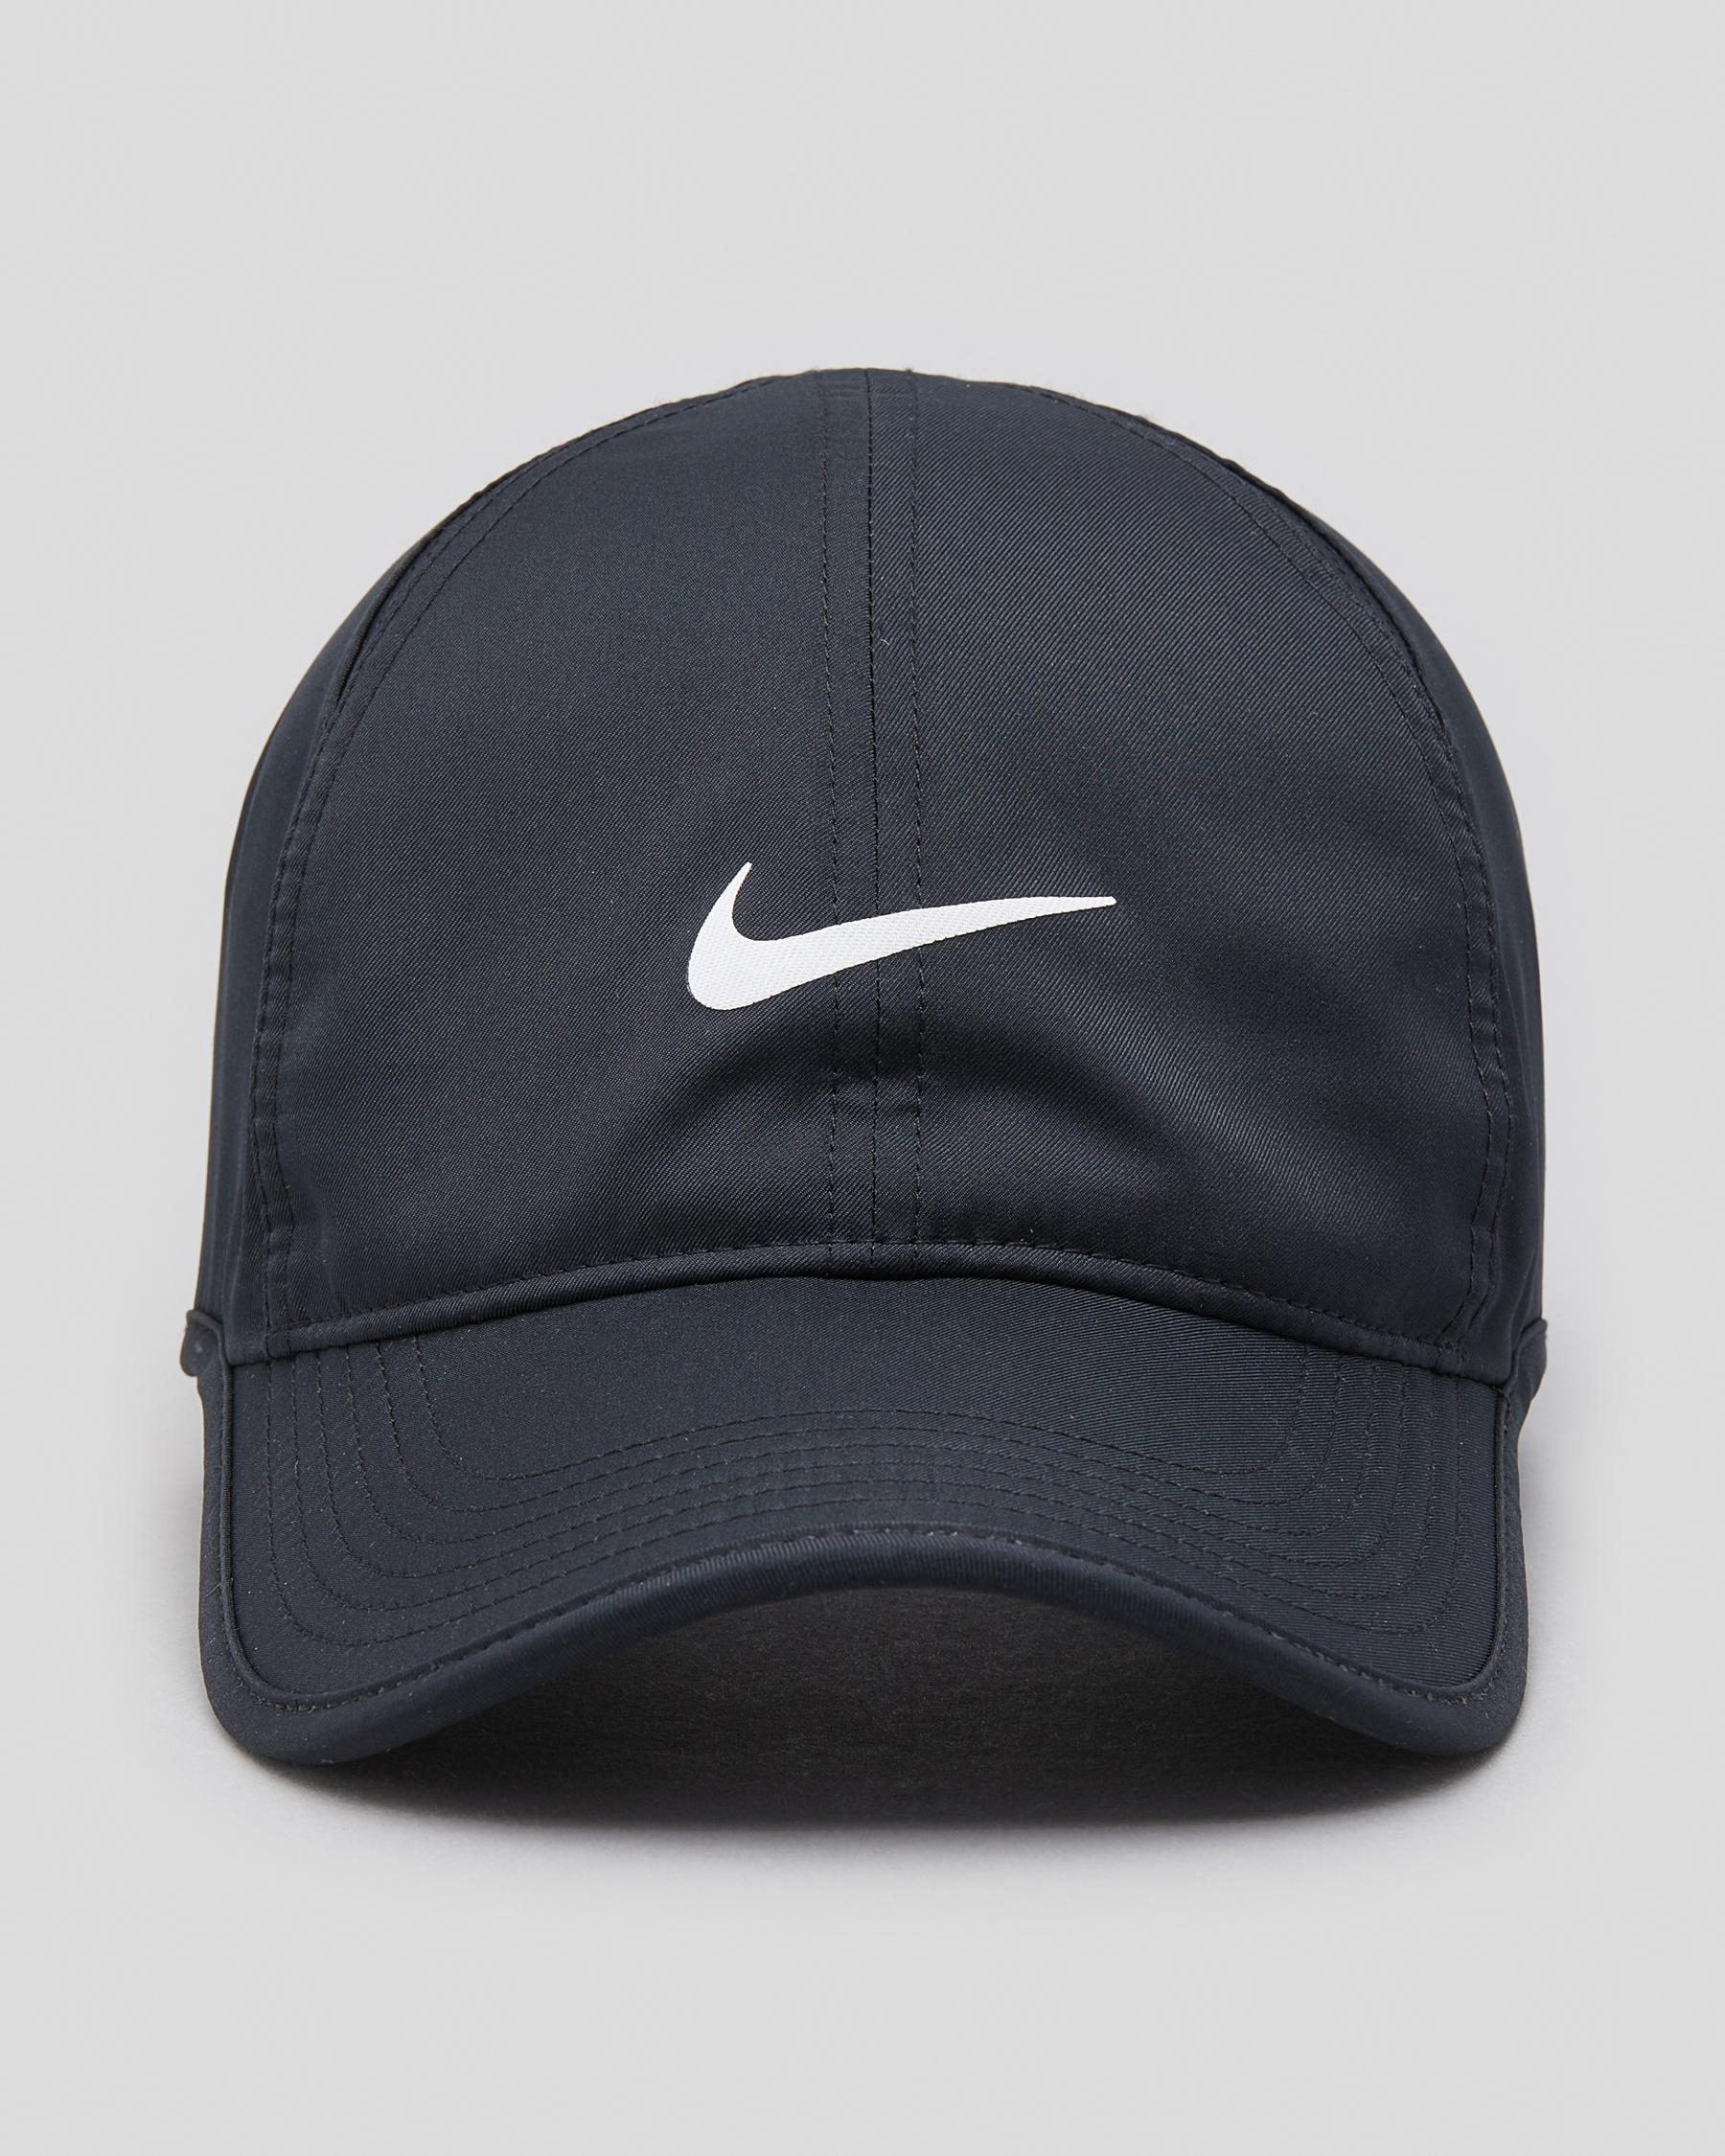 Nike Featherlight Cap In Black/ Black/ White - Fast Shipping & Easy ...